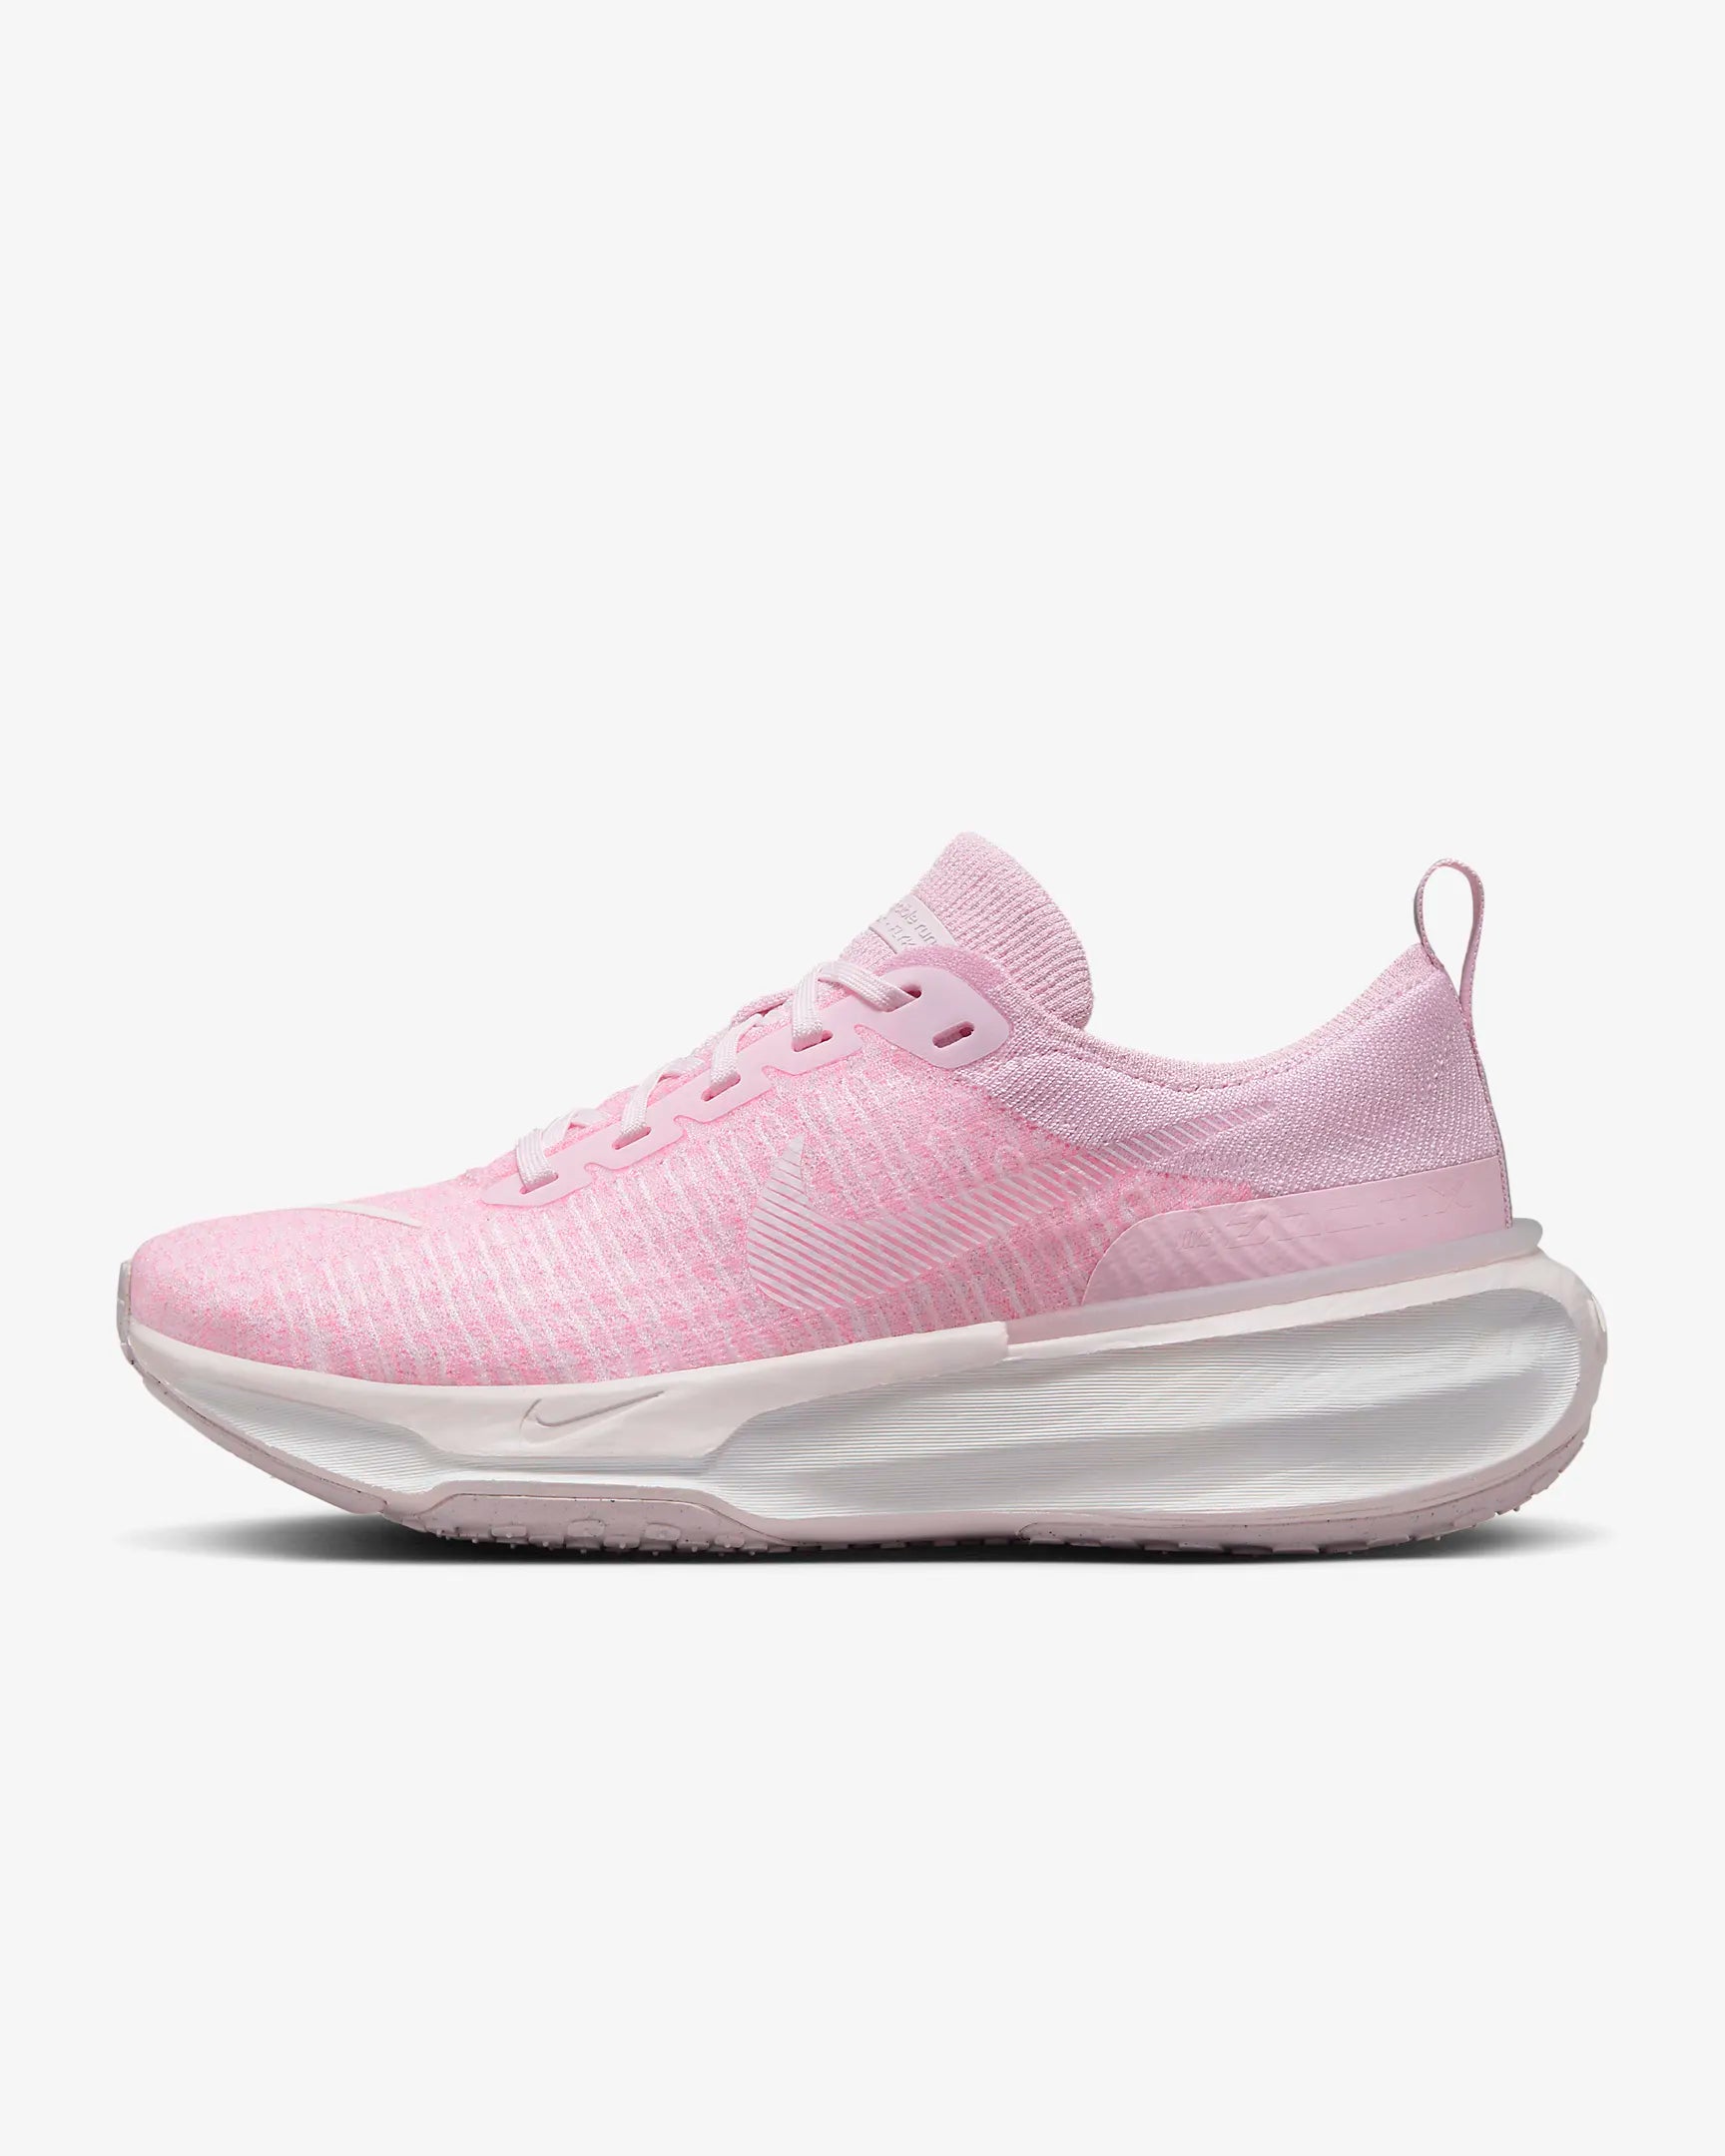 Nike Invincible 3 Women's Road Running Shoes-Pink